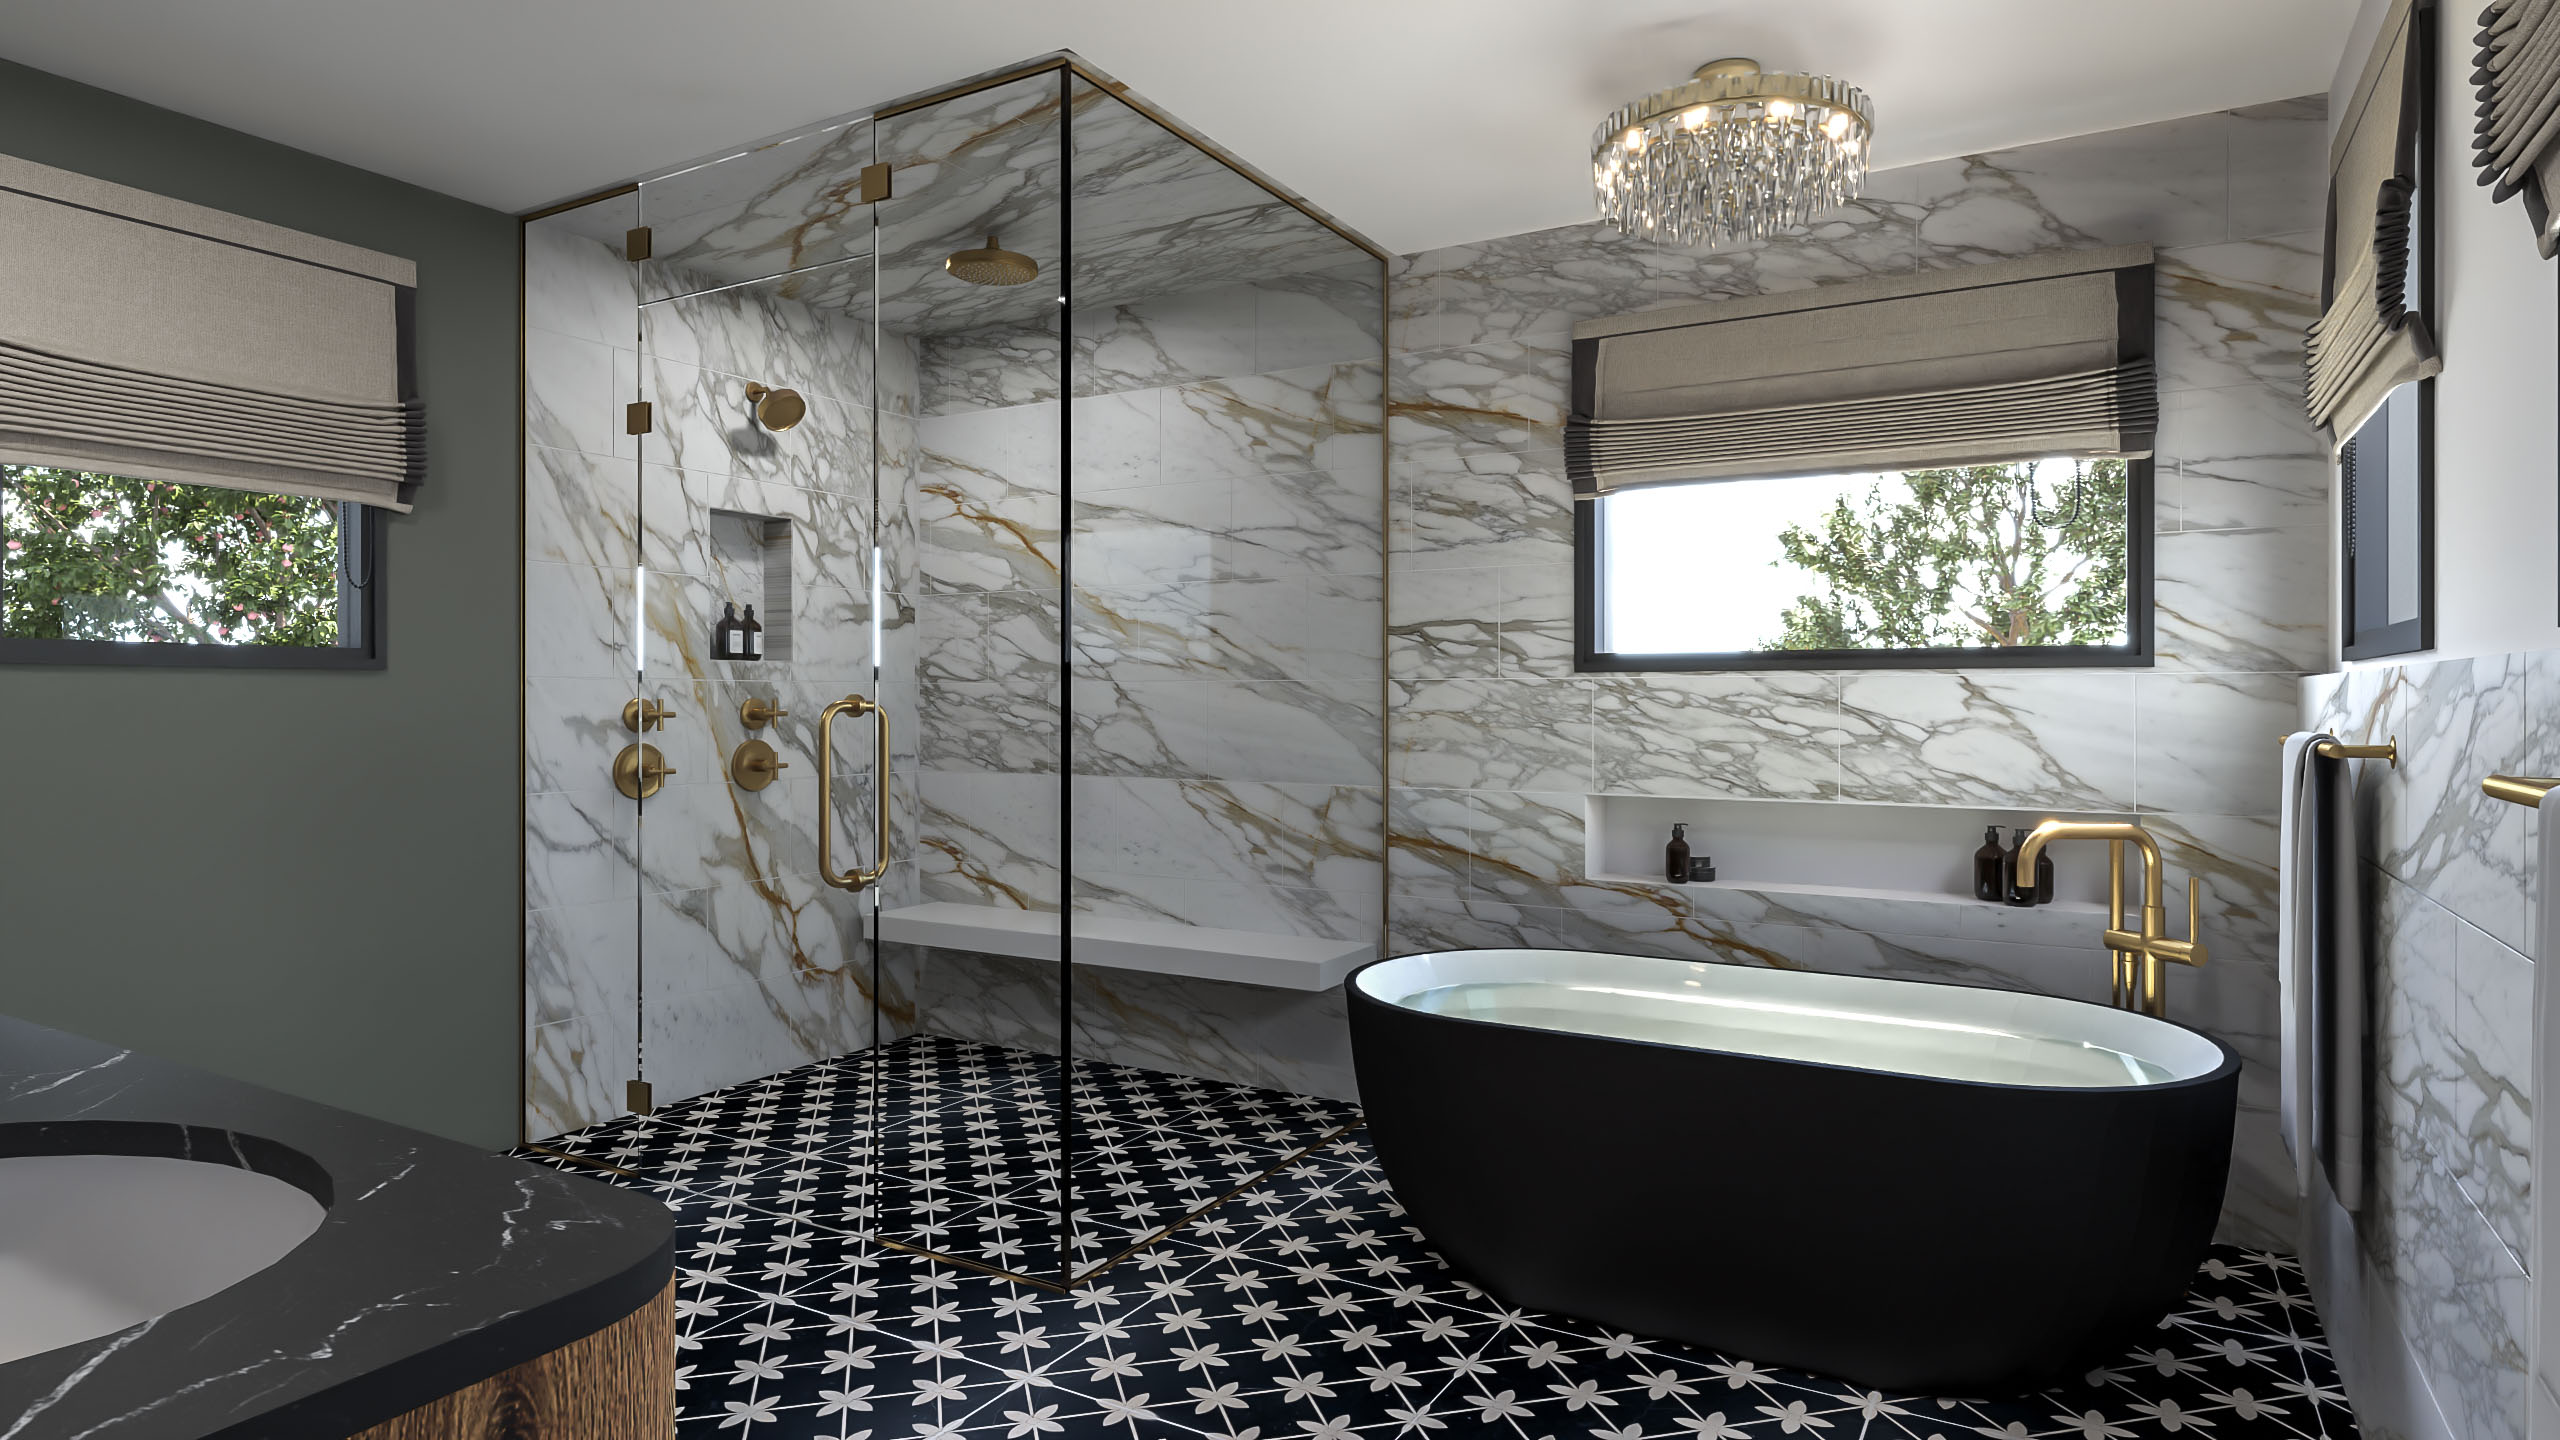 Bathroom with fleur de list black and white tile floor, black free standing bath, marble shower with glass enclosure and crystal flush mount chandelier